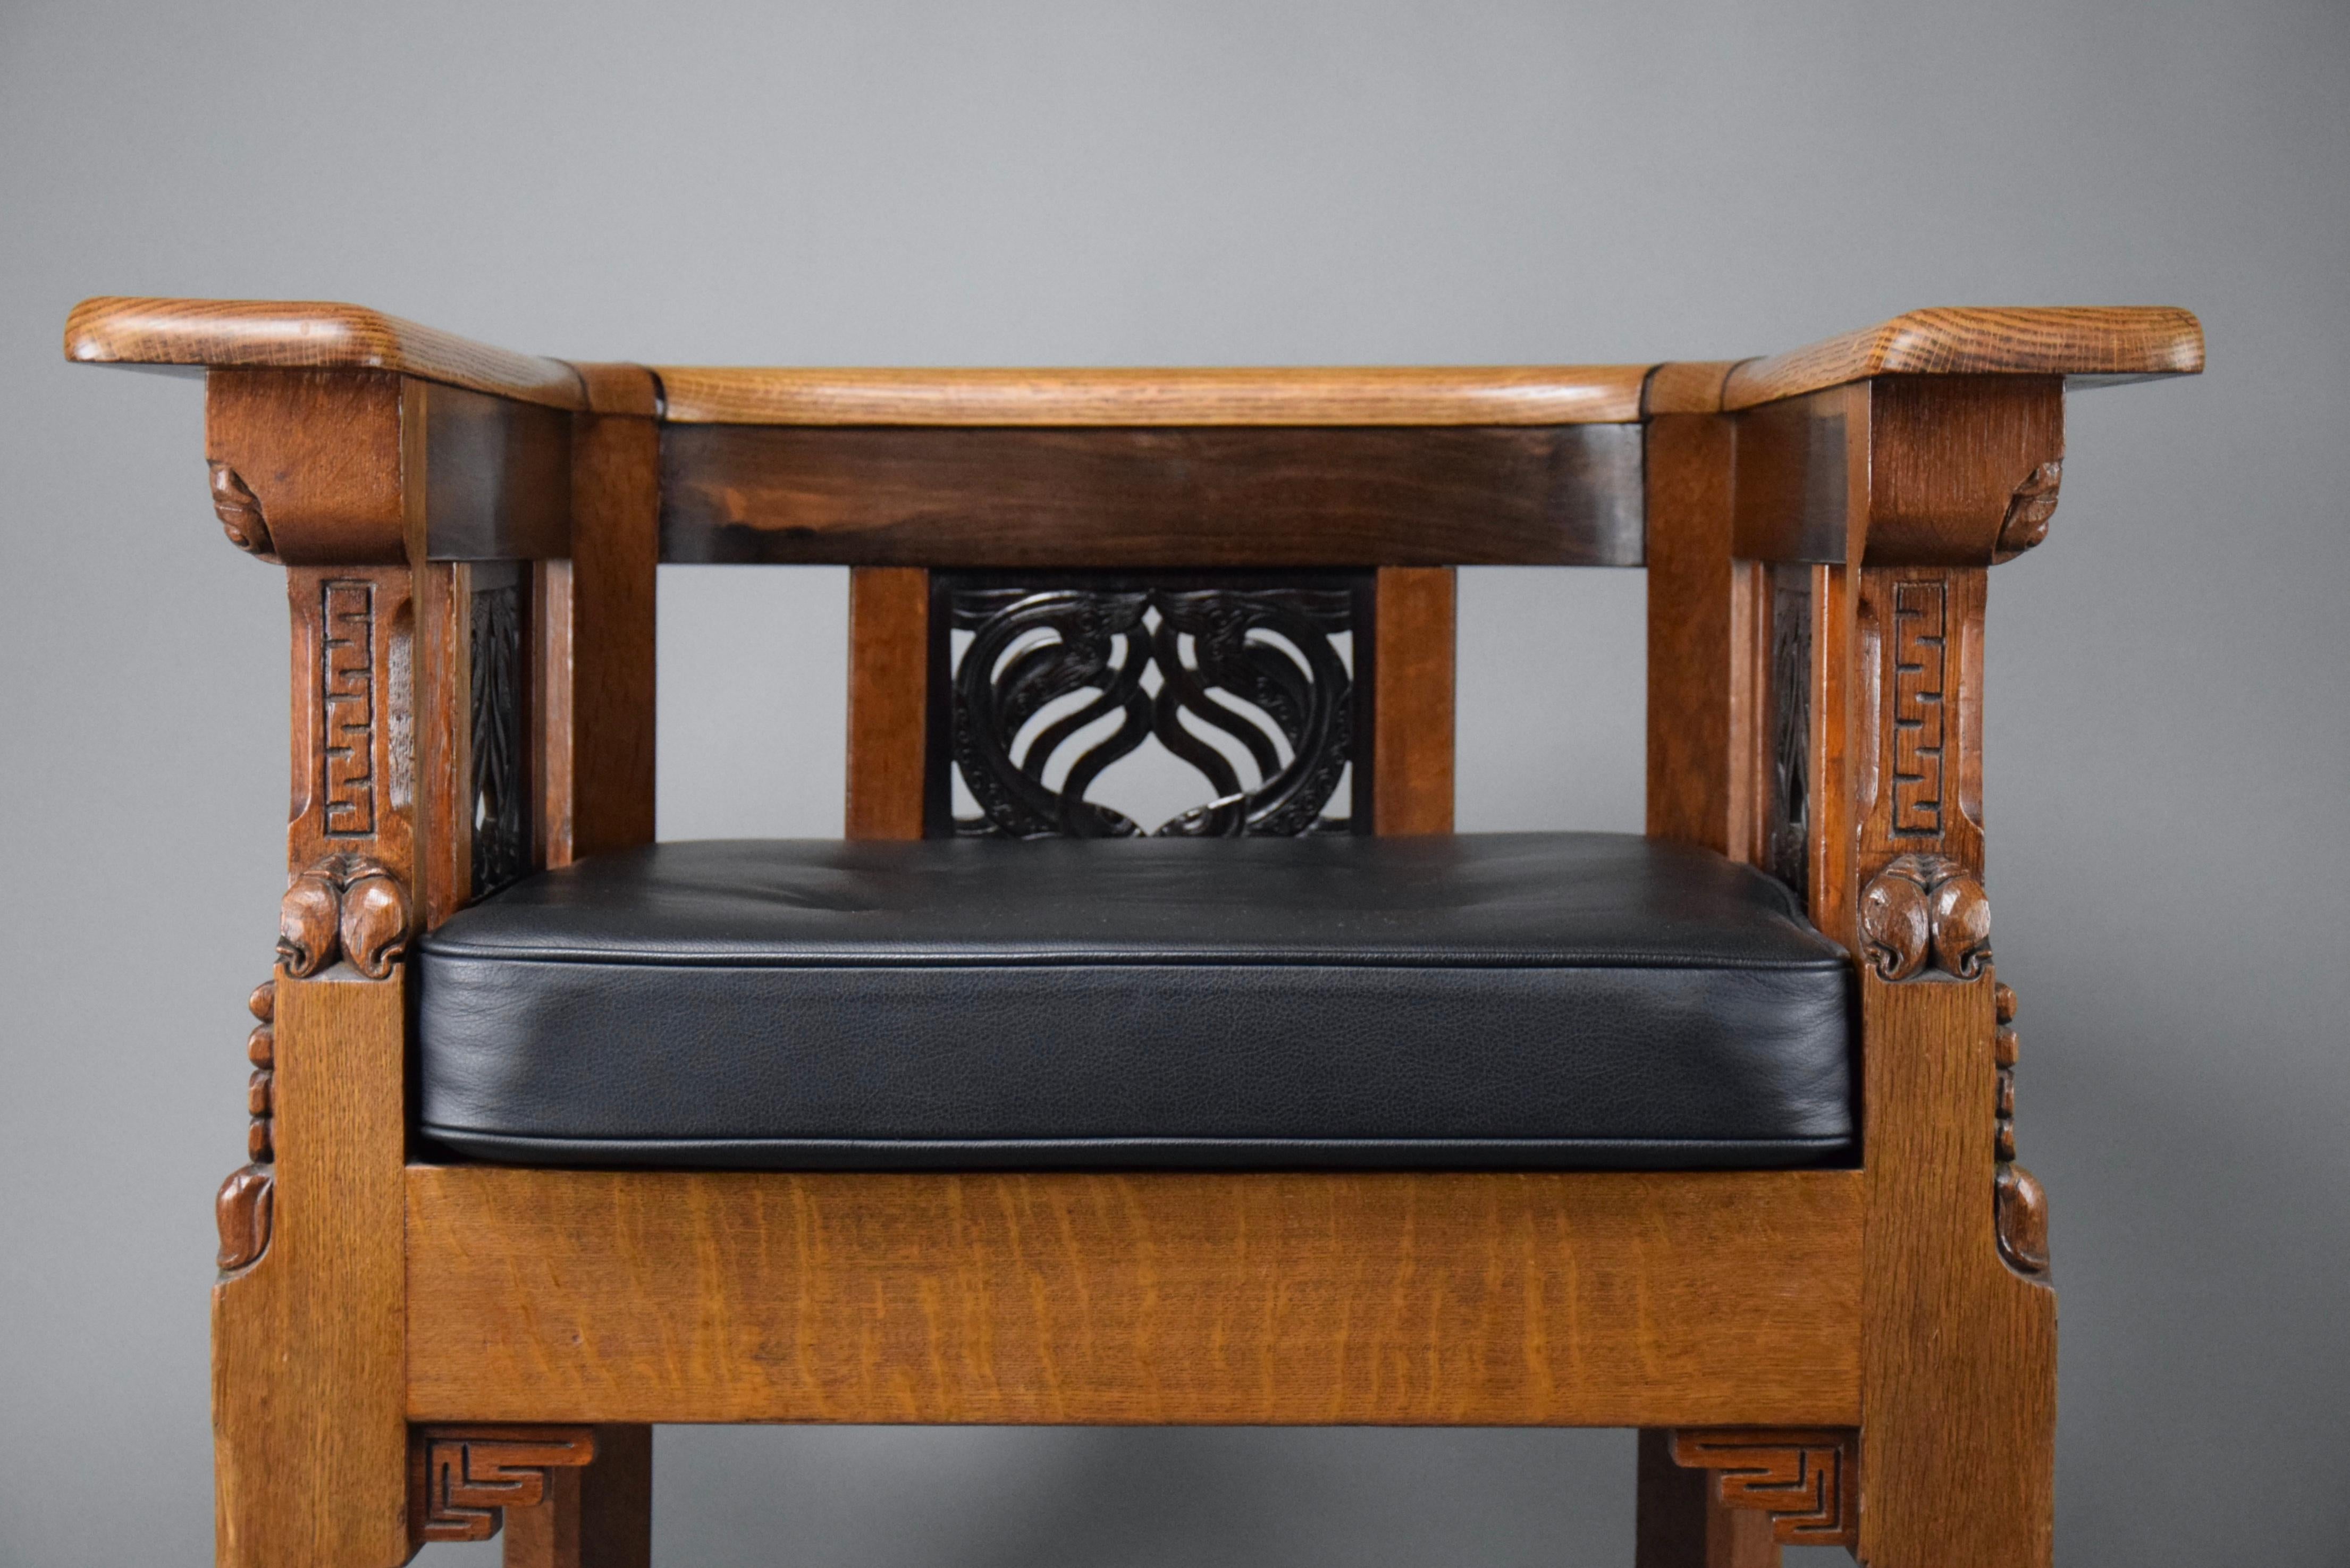 Introducing a Masterpiece of Art Deco Elegance: The One-of-a-Kind Lion Cachet Handcrafted Oak and Jatoba Wooden Armchair!

Prepare to be captivated by a true work of art that transcends mere furniture. This handcrafted, hand-sculptured oak and